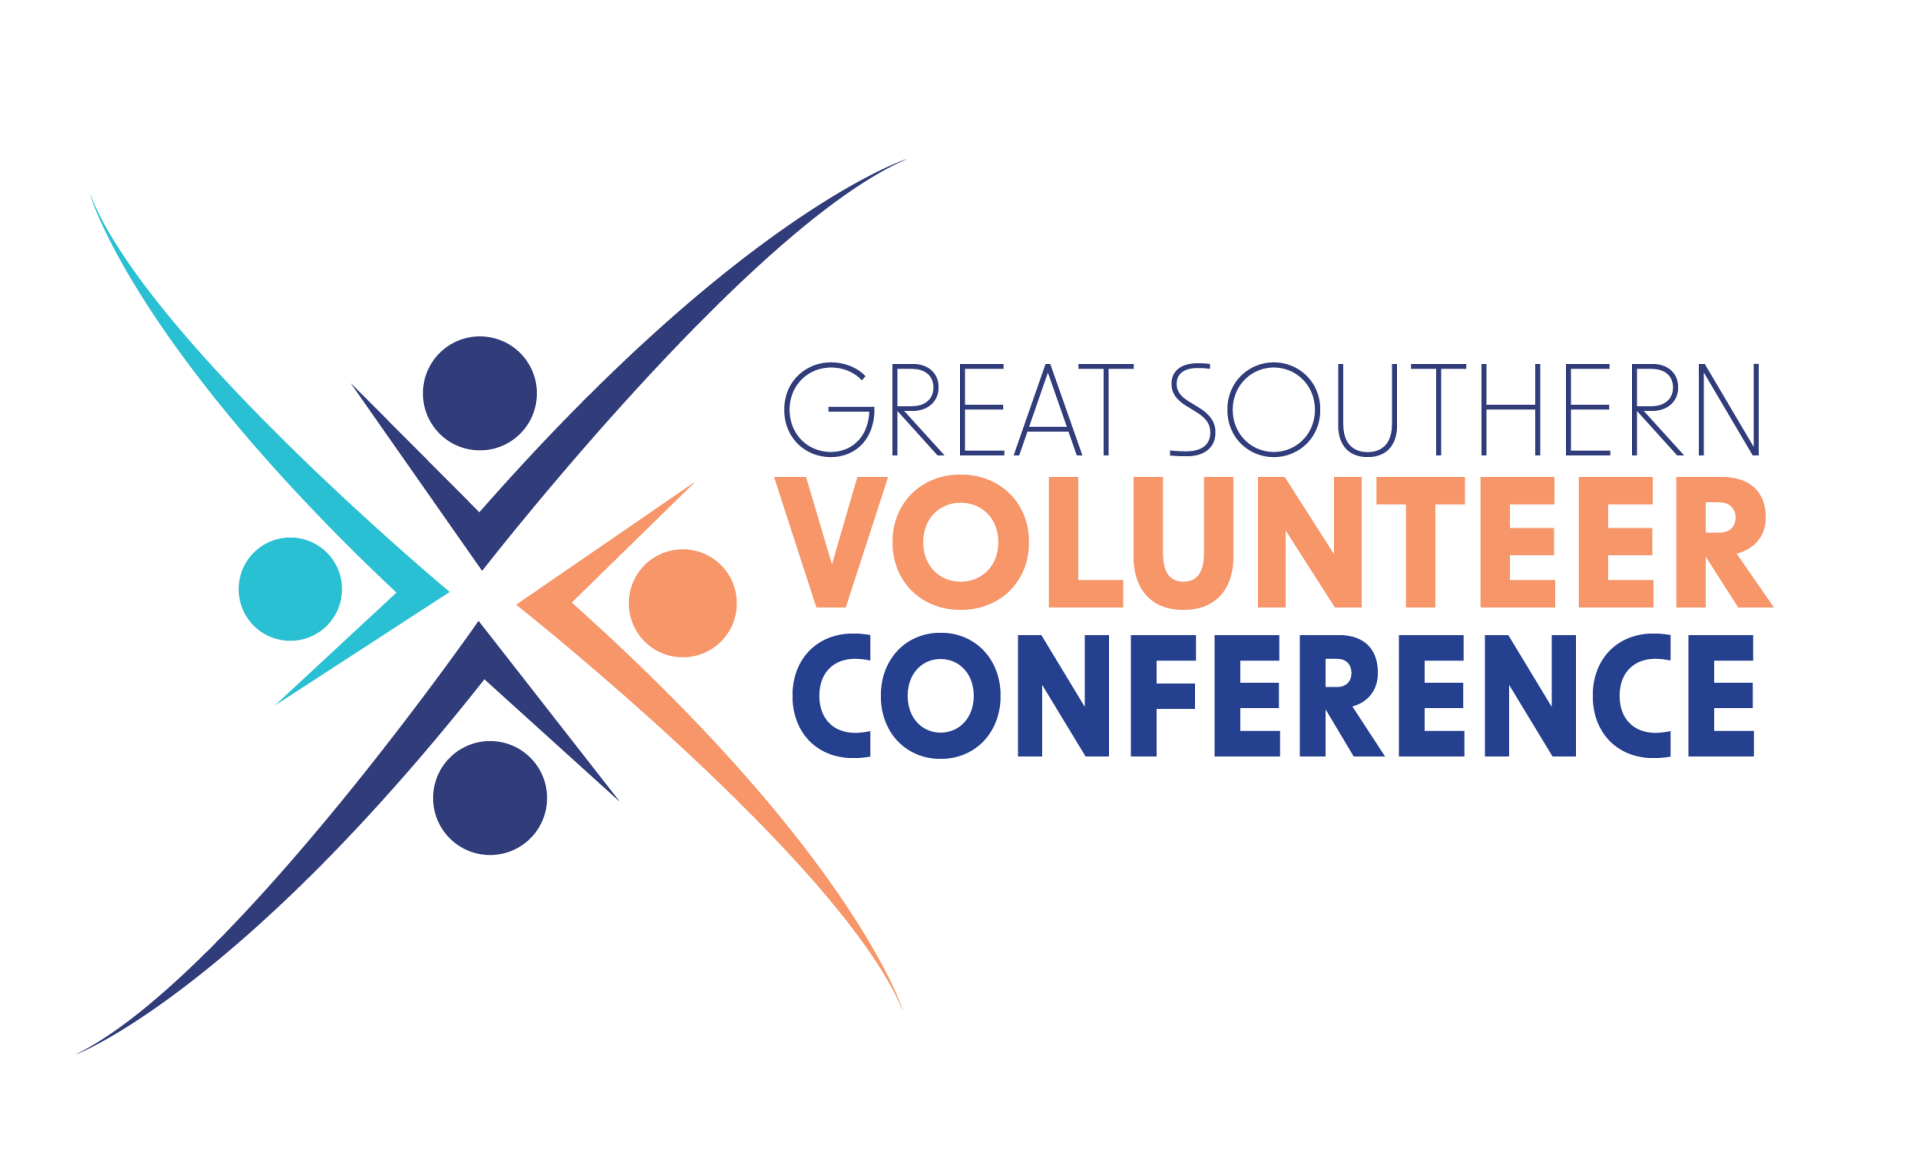 Great Southern Volunteer Conference